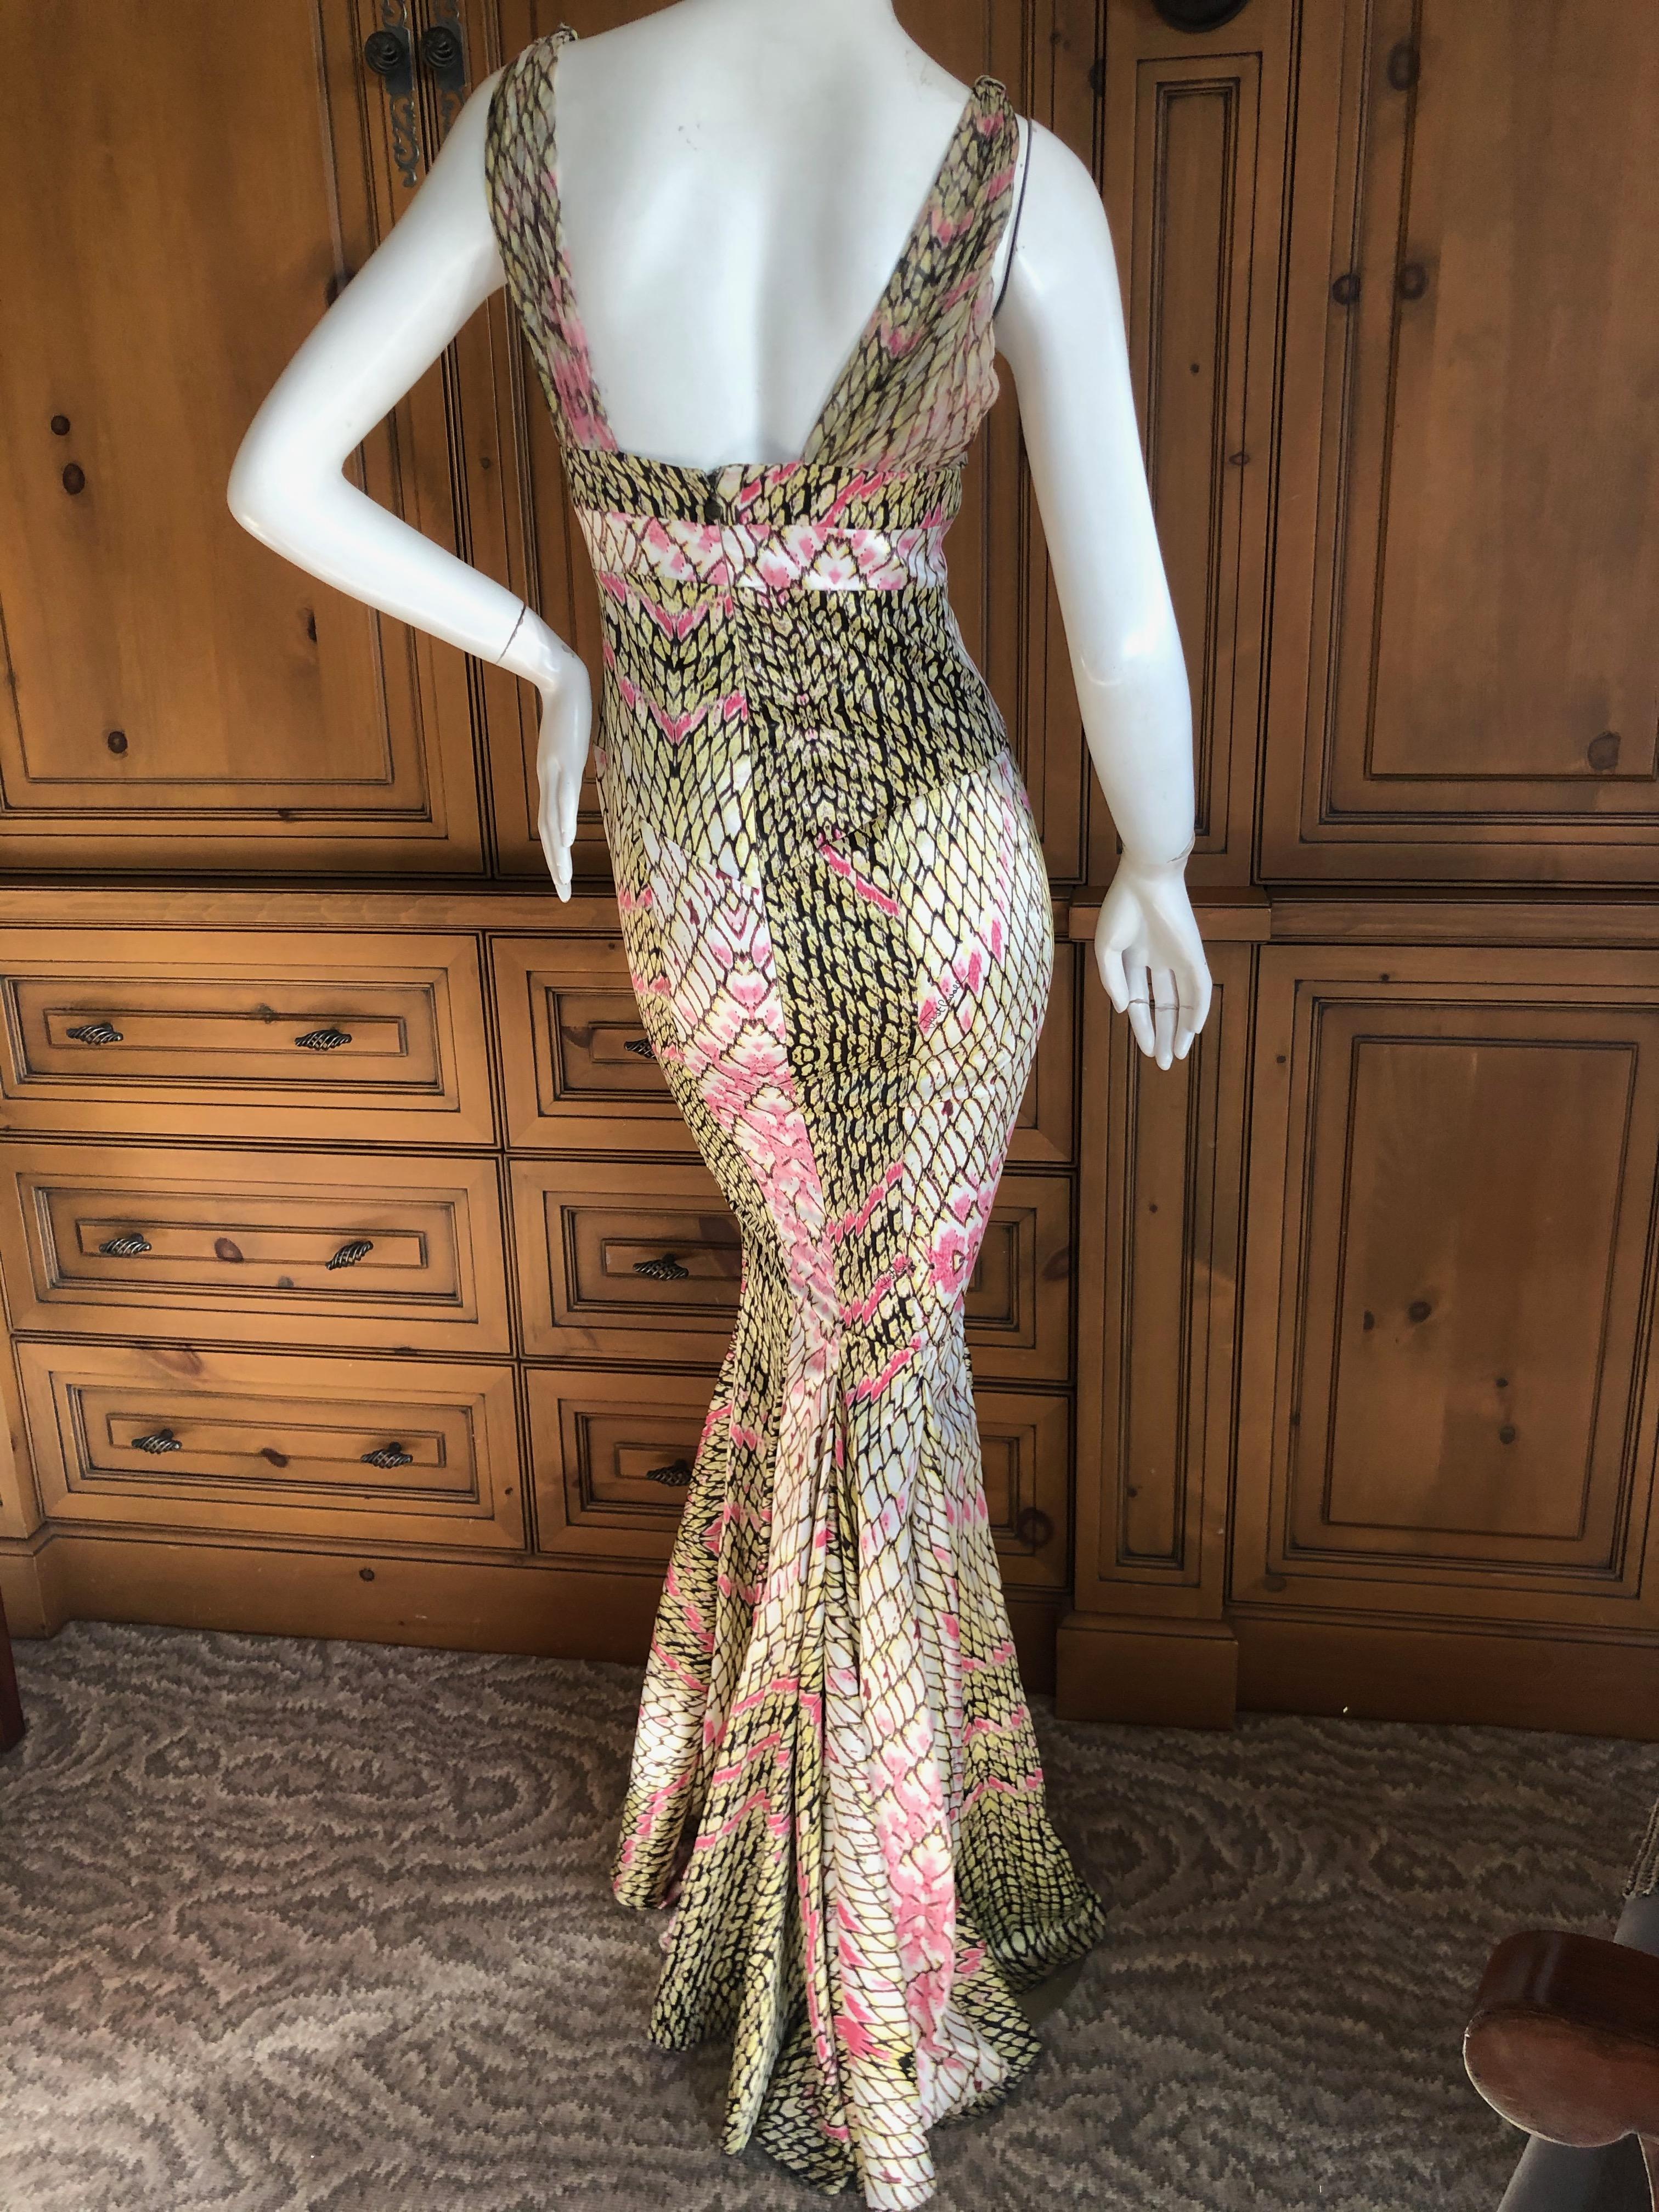 Just Cavalli by Roberto Cavalli Reptile Print Fishtail Mermaid Gown
This is so pretty, with a mermaid fishtail back.
Size 40, but runs small
Bust 34